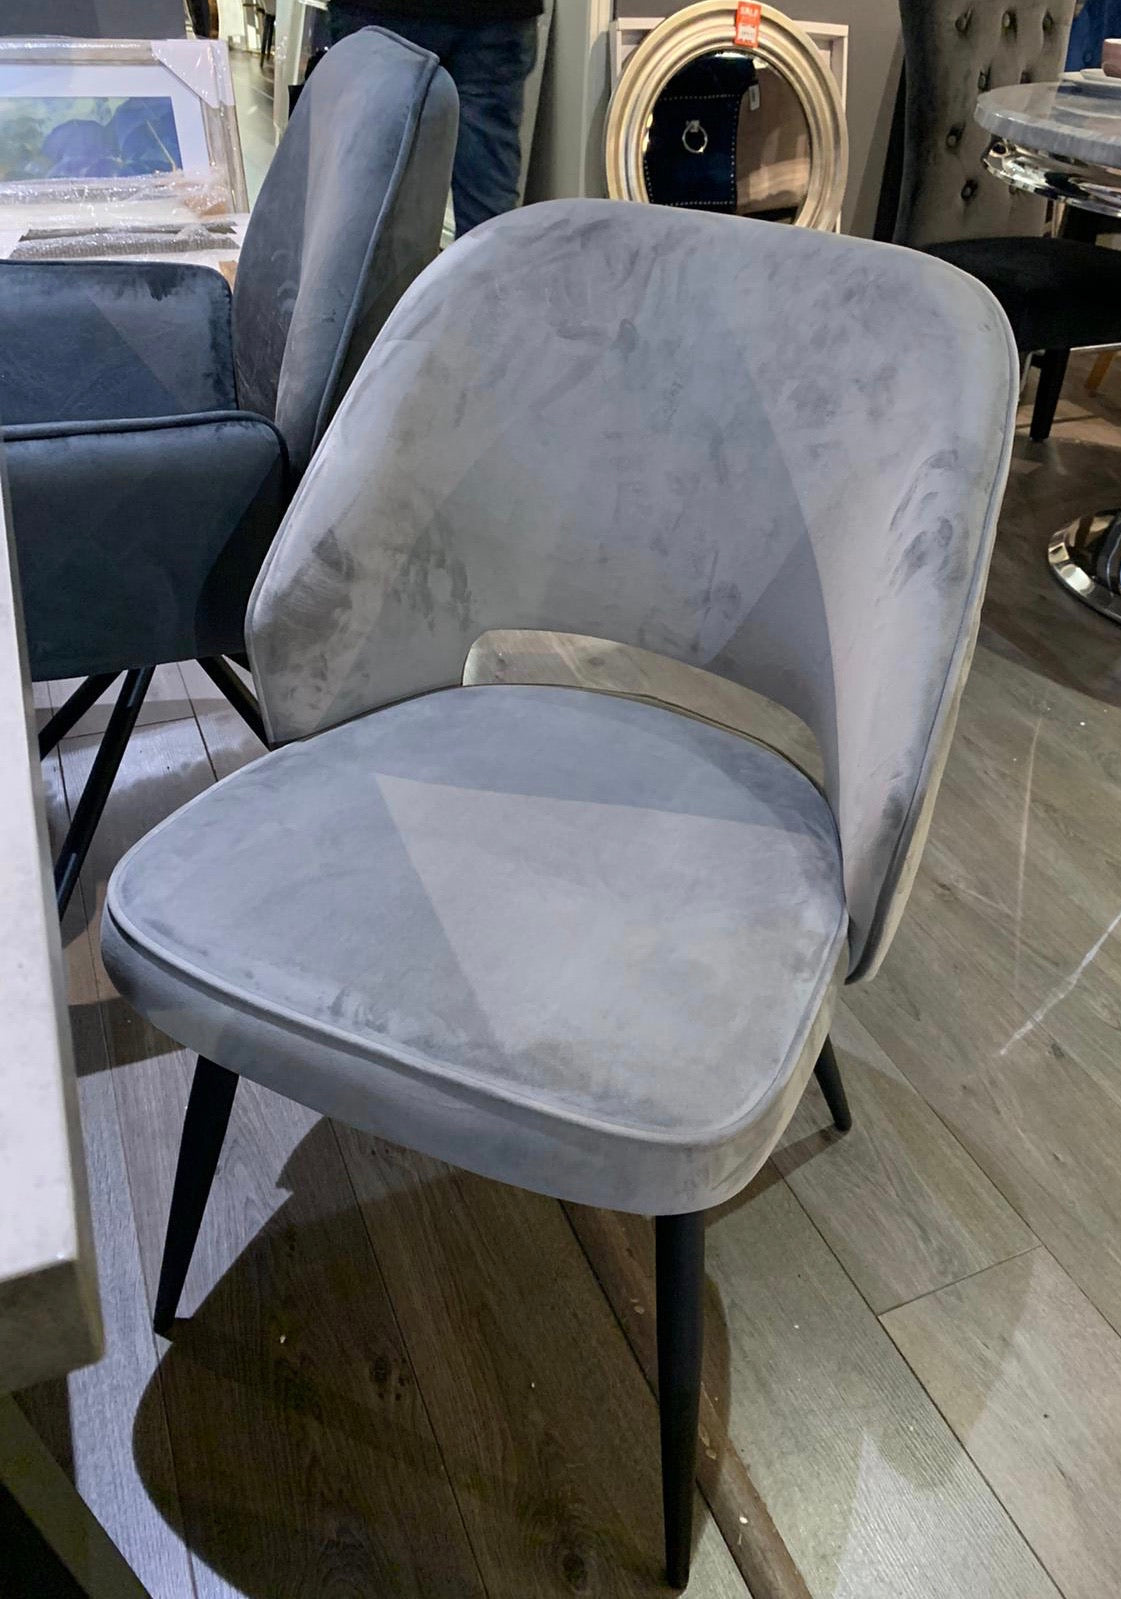 Sachs dining chair velvet set of 4 reduced . Pay and Collect instore or